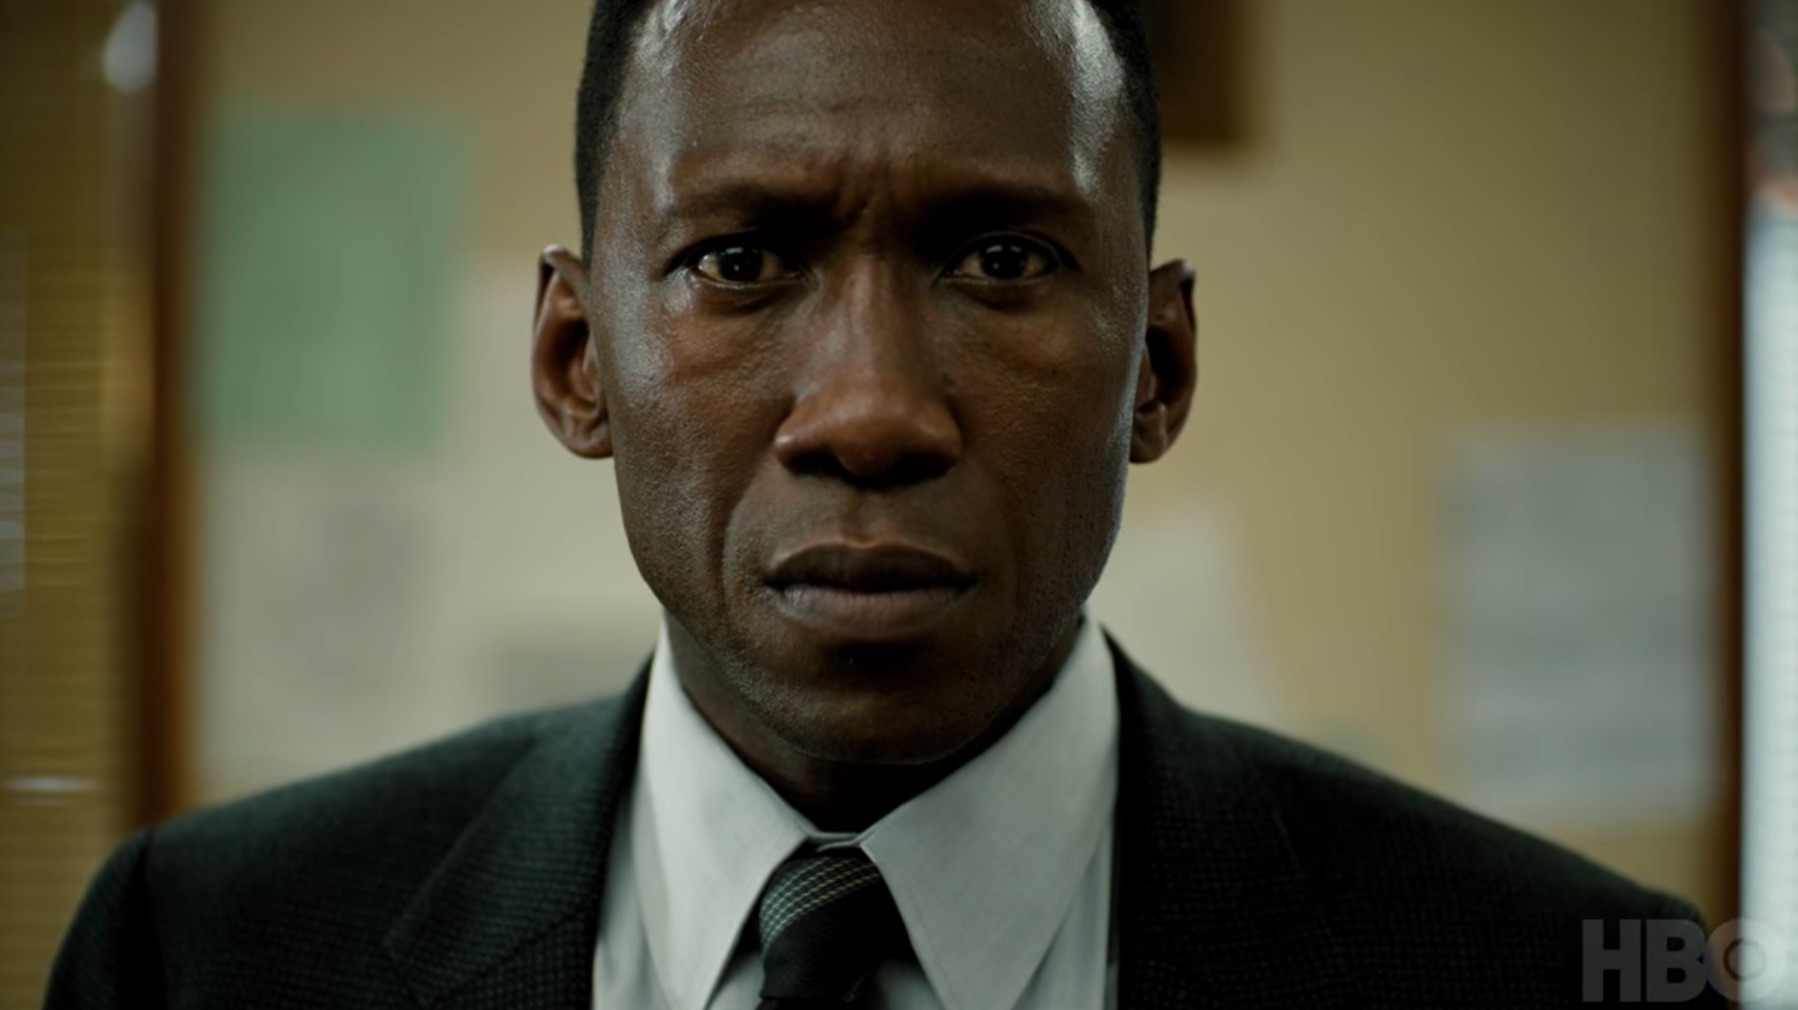 True Detective Season 4 Release Date, Preview, Trailer, Watch Online, and More